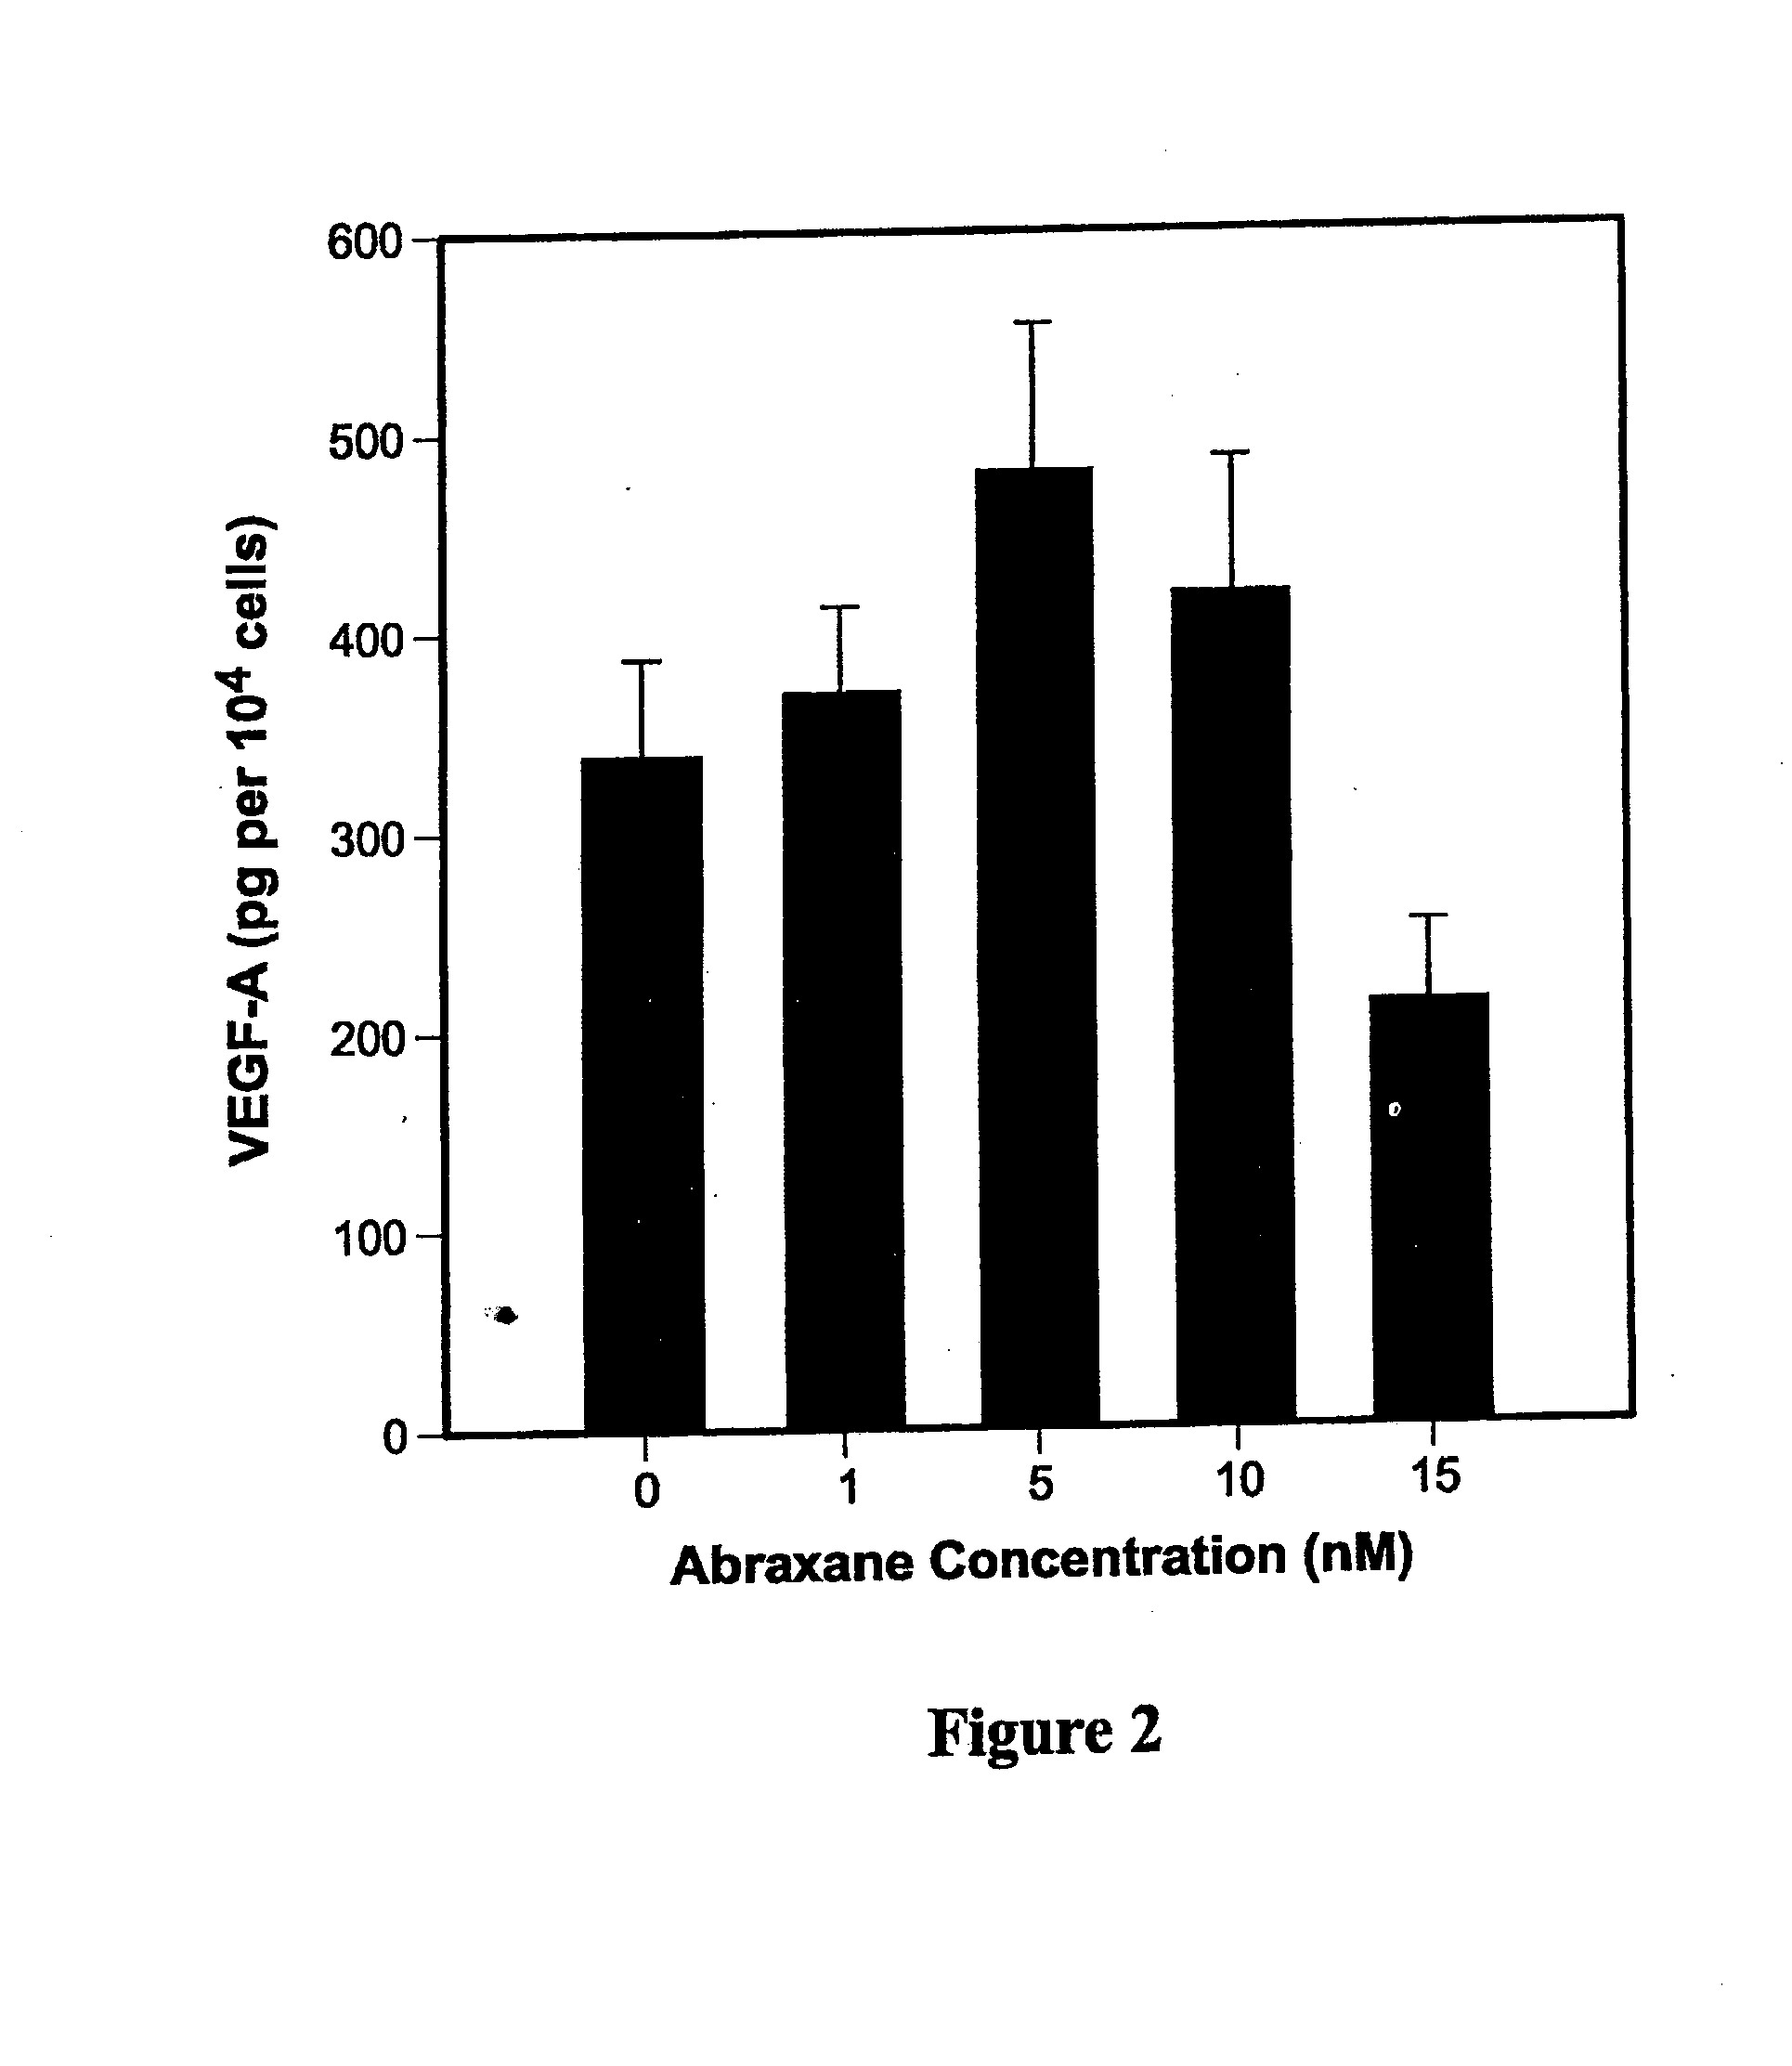 Combinations and modes of administration of therapeutic agents and combination therapy